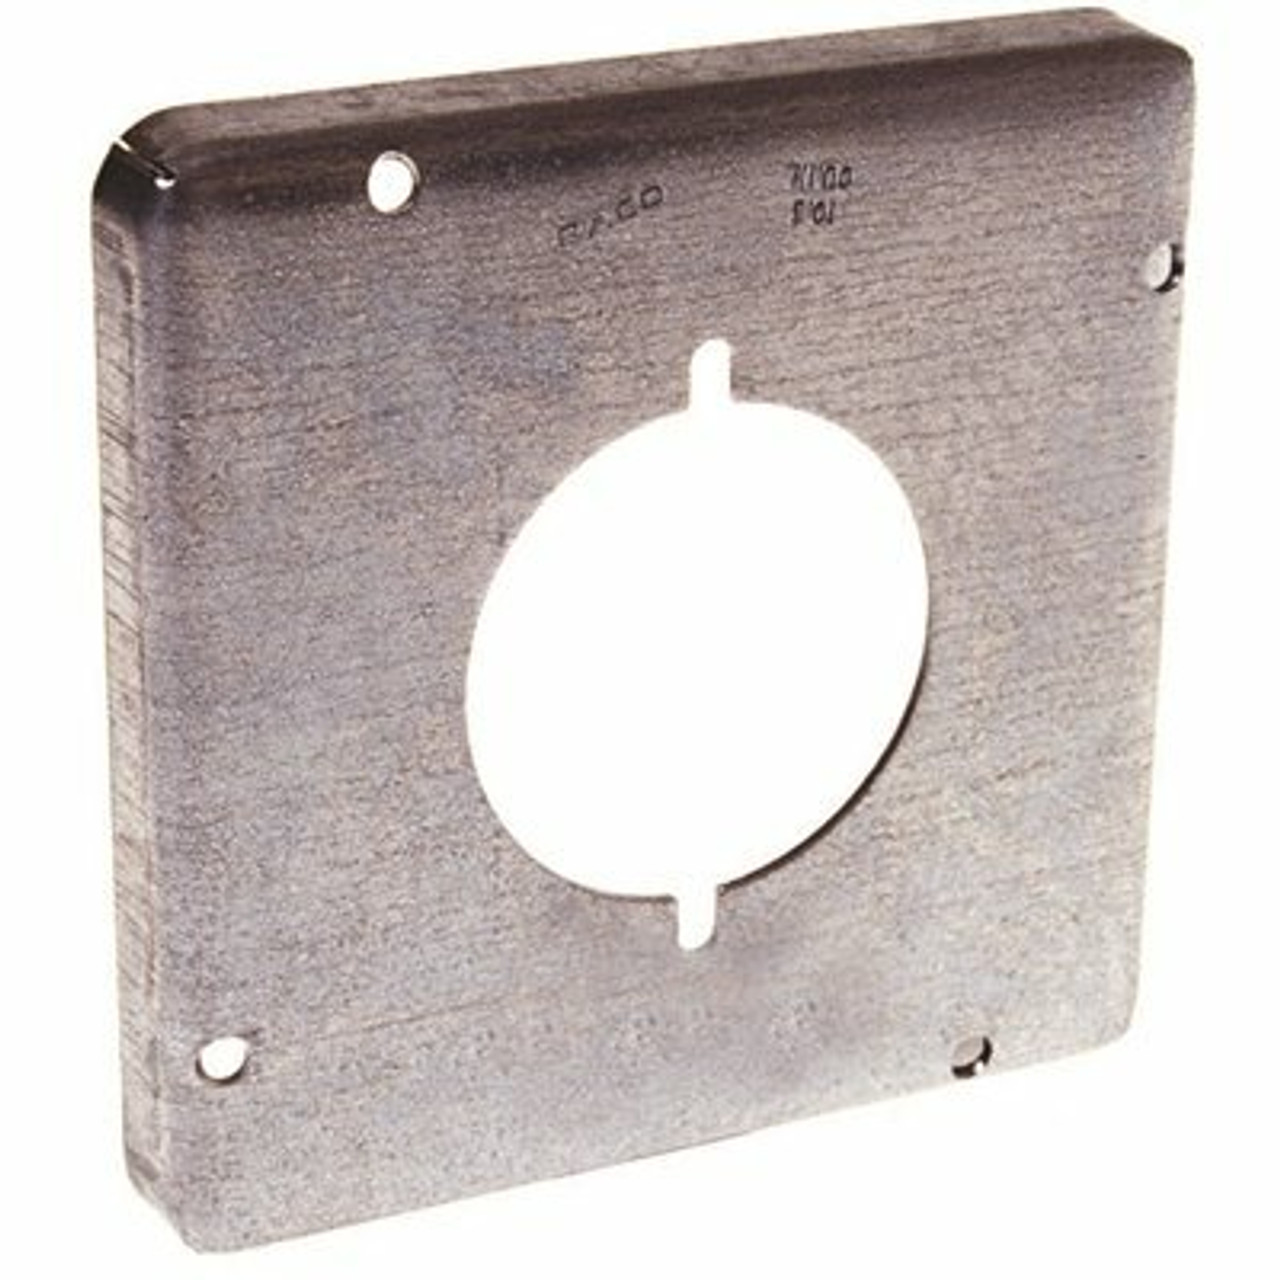 Raco 4-11/16 In. Square Exposed Work Cover For 30-50 Amp Round Device